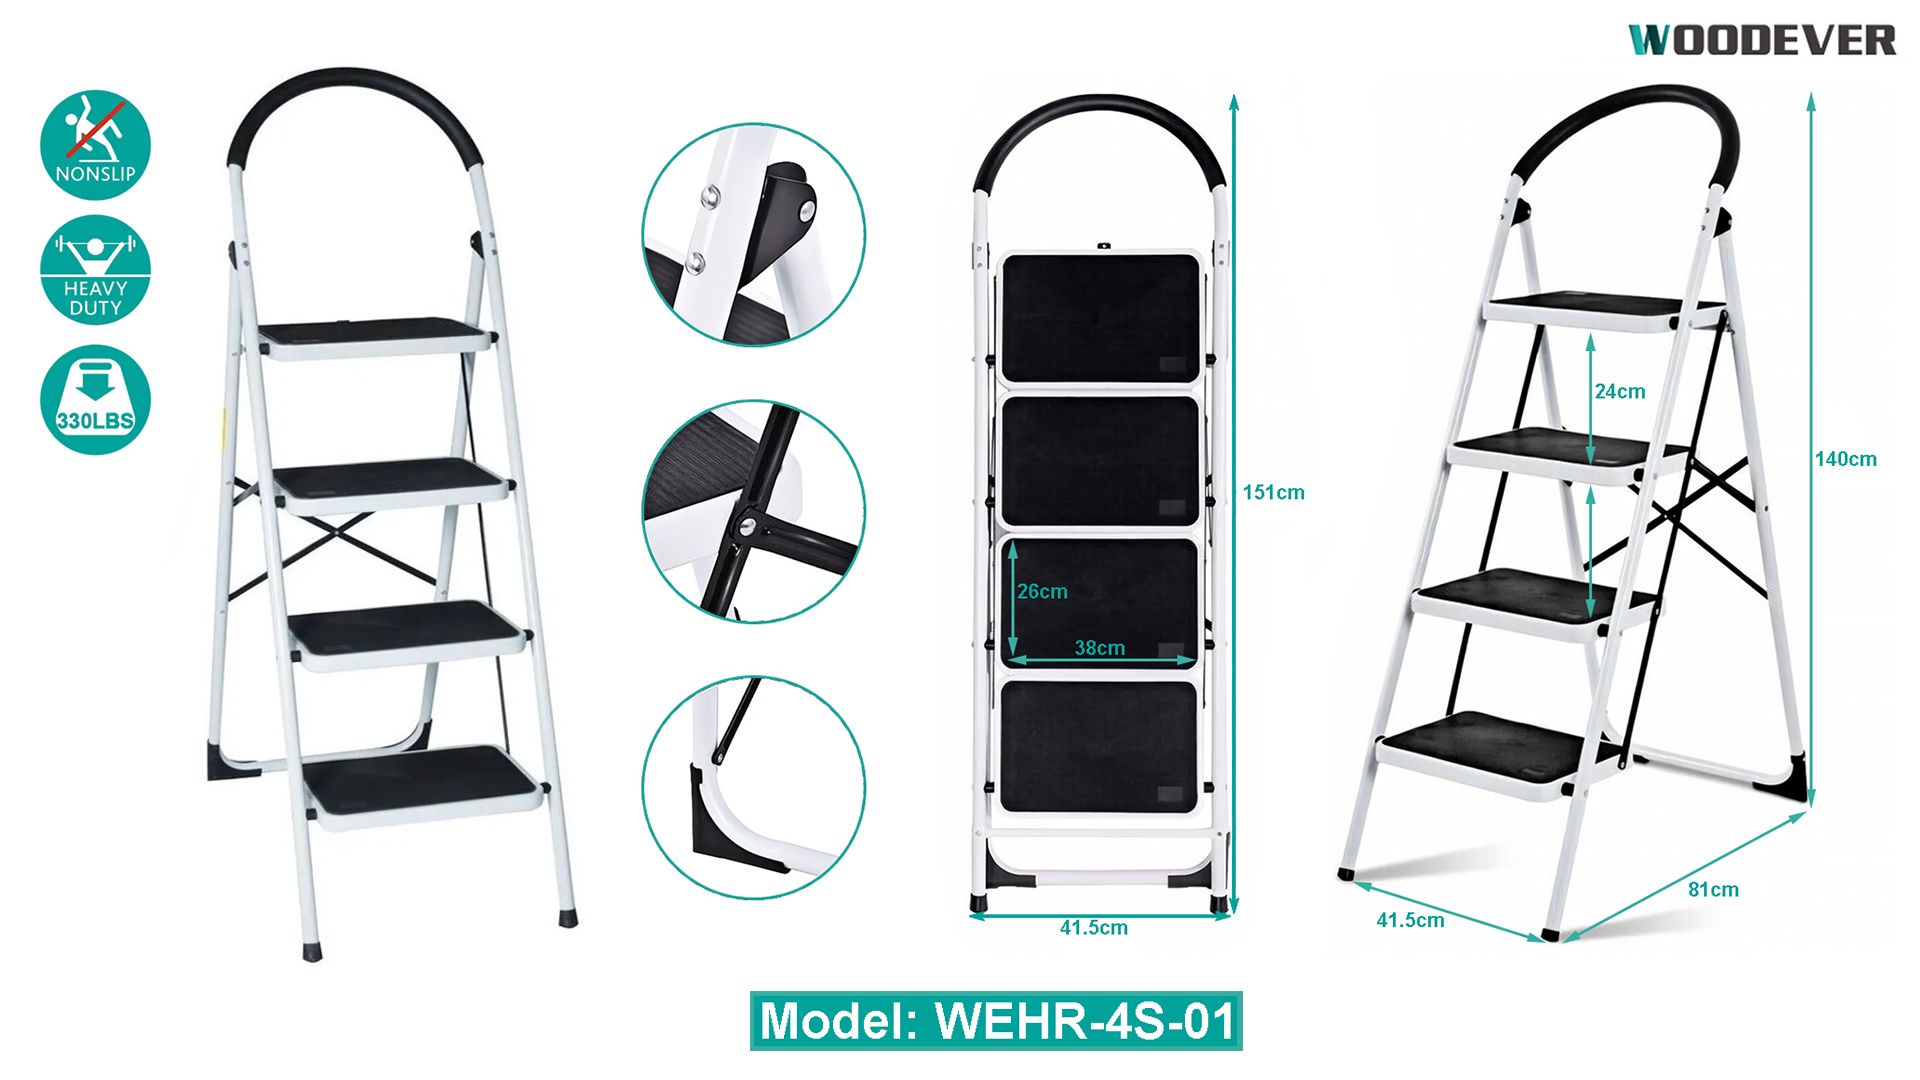 4 tiers step ladders stool with anti-slip handle, safety lock and extra wide pedals